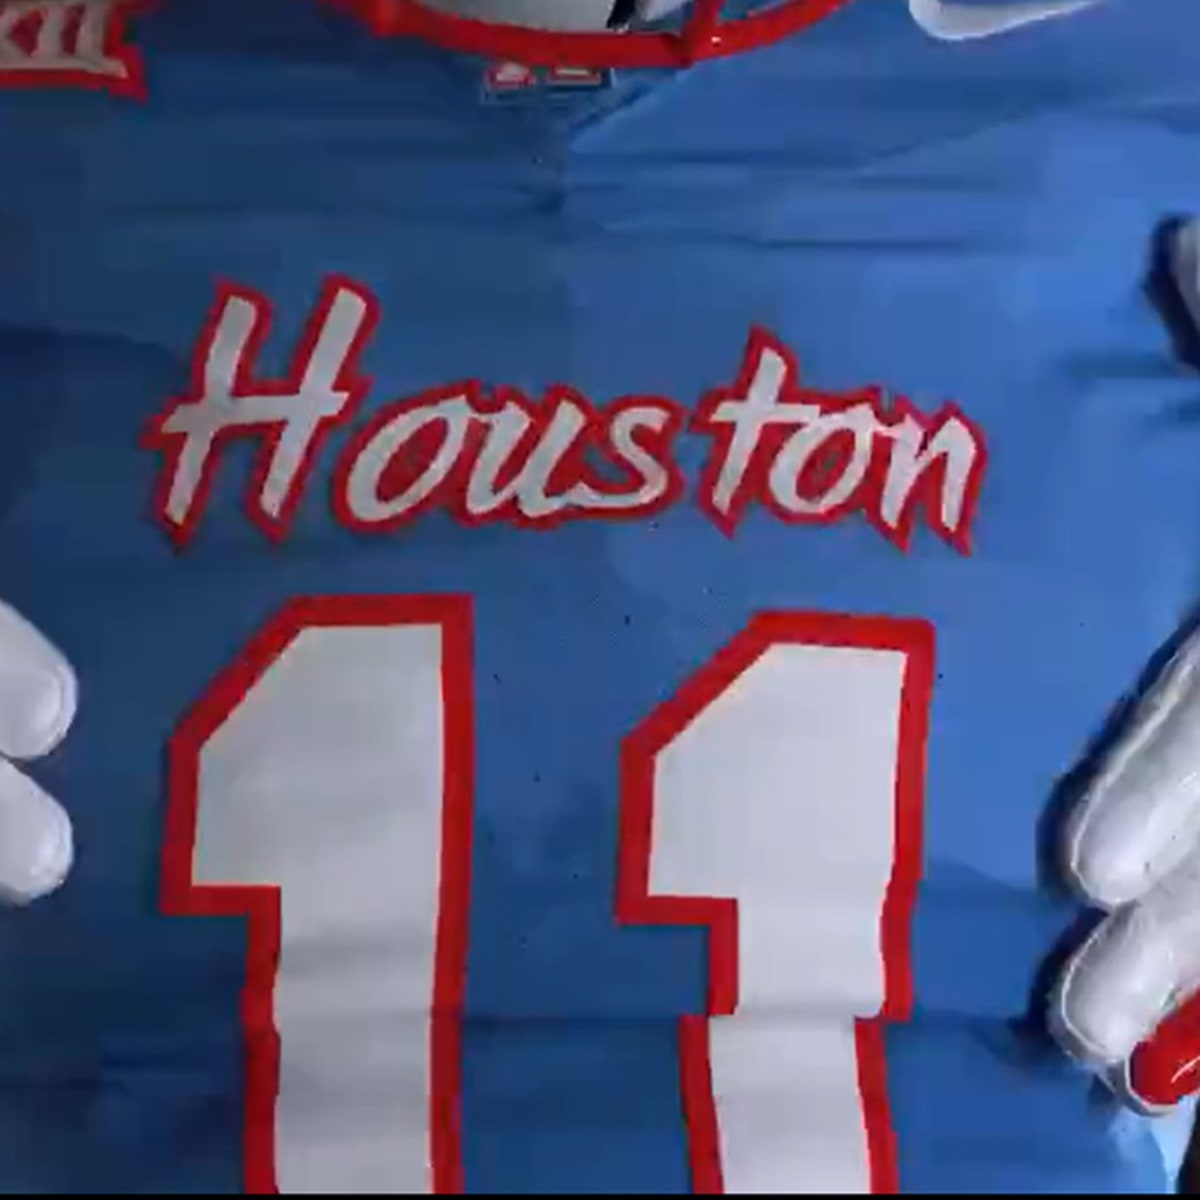 UH football uses throwback Oilers-like uniforms to enter new era